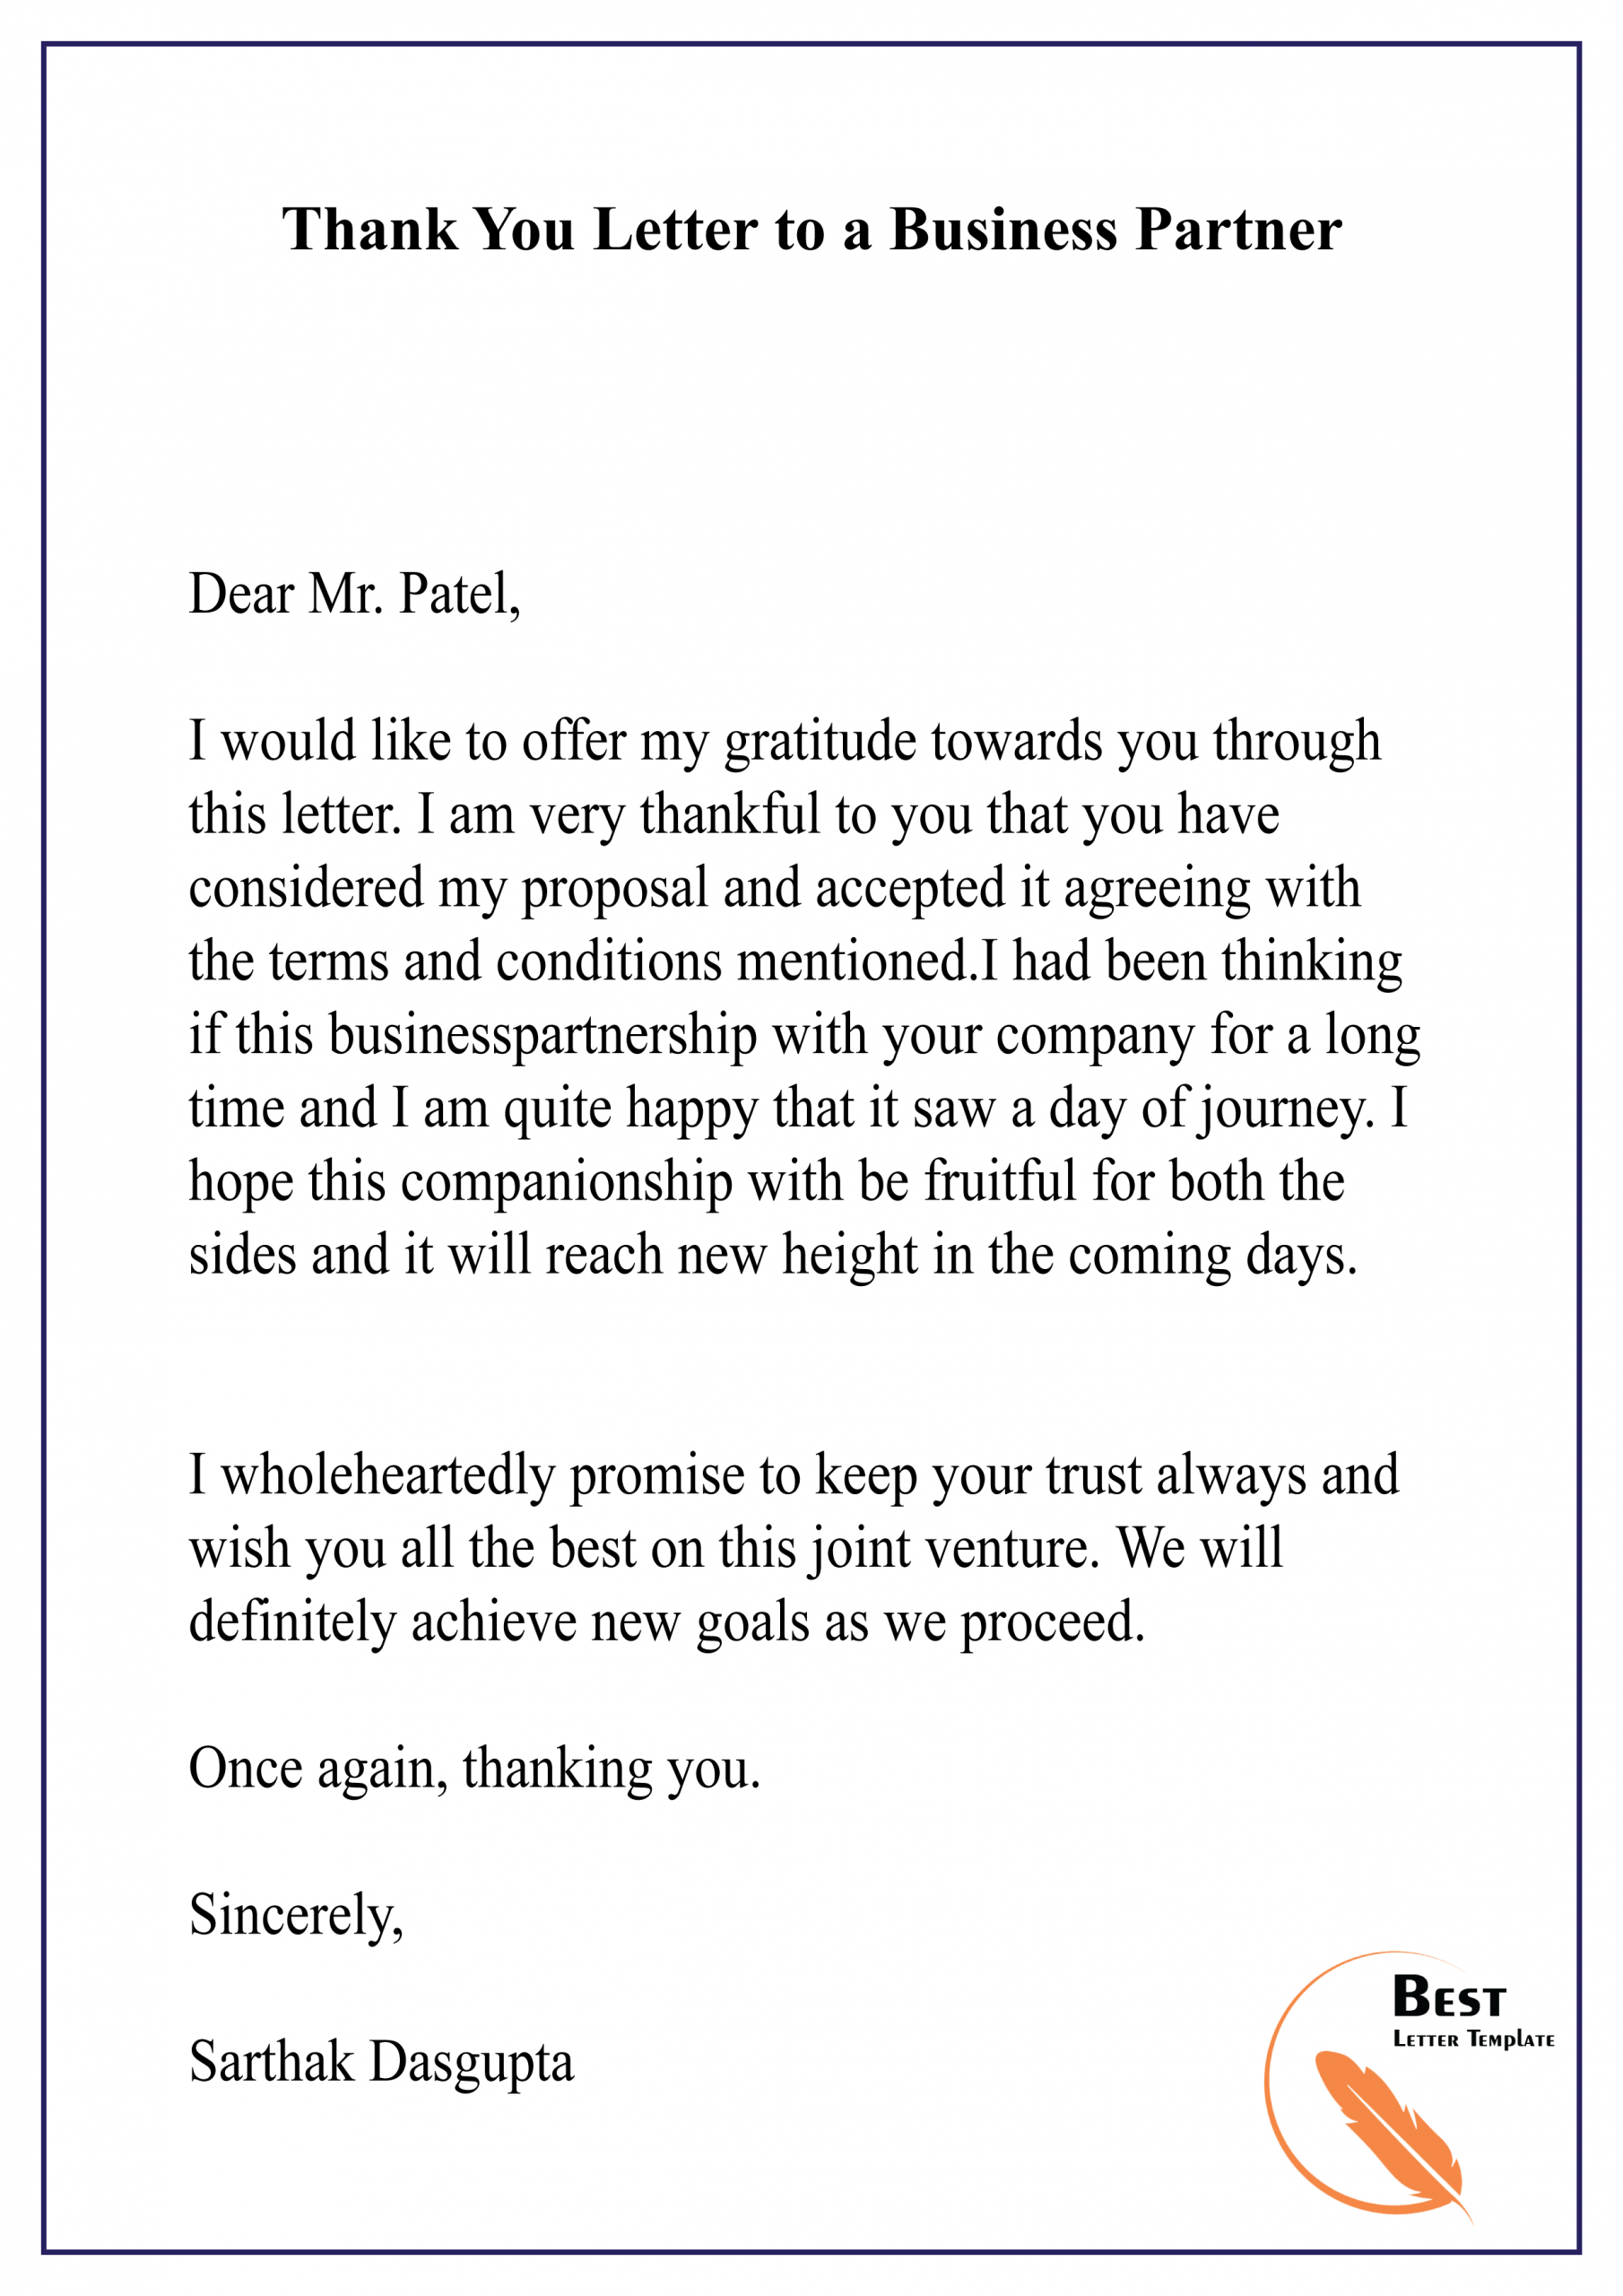 Thank You Letter To A Business Partner 01 Best Letter Template for proportions 2480 X 3508